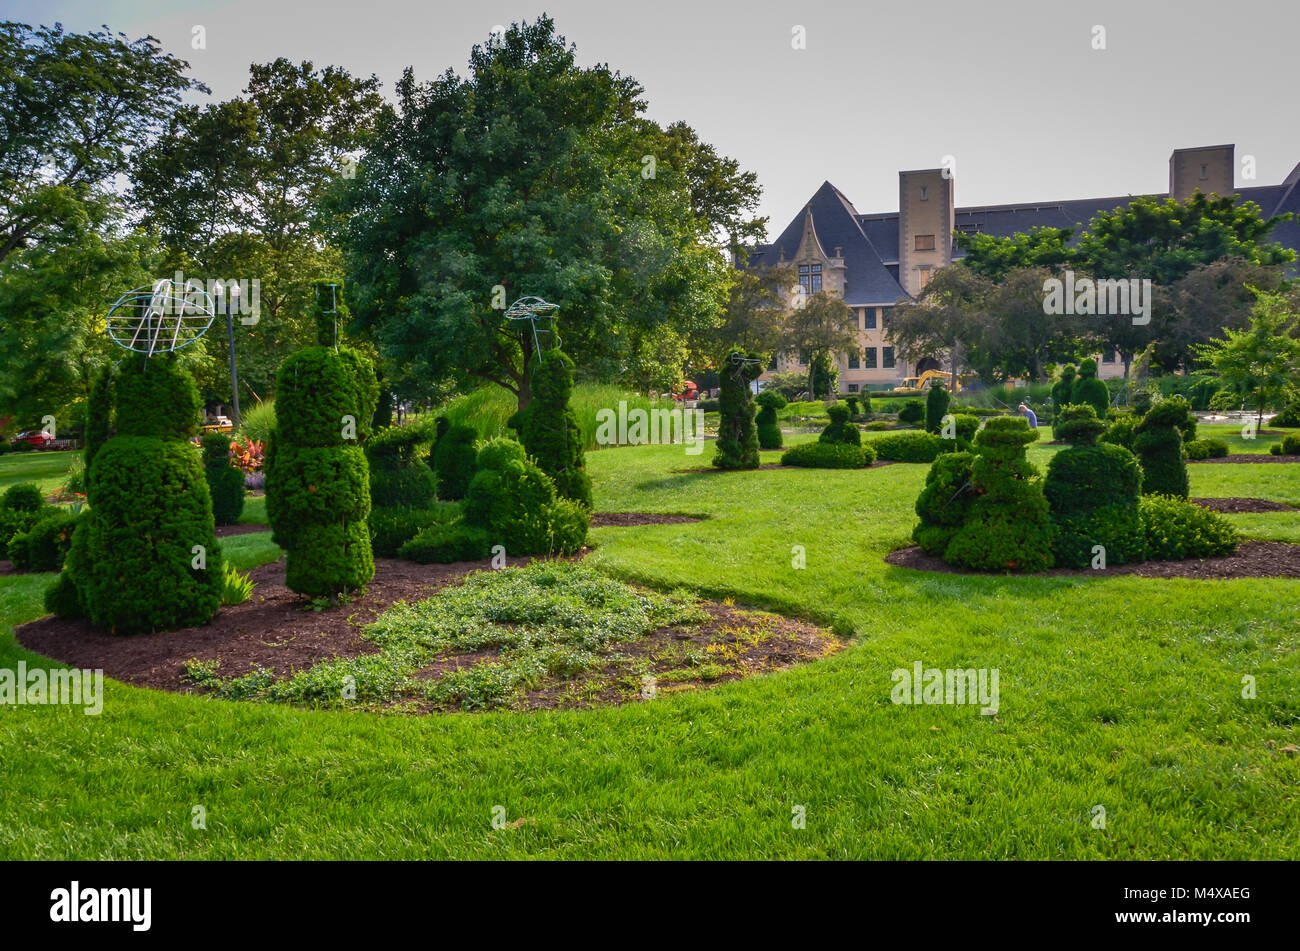 The Topiary Garden Park In Columbus Ohio Sits On The Remnants Of